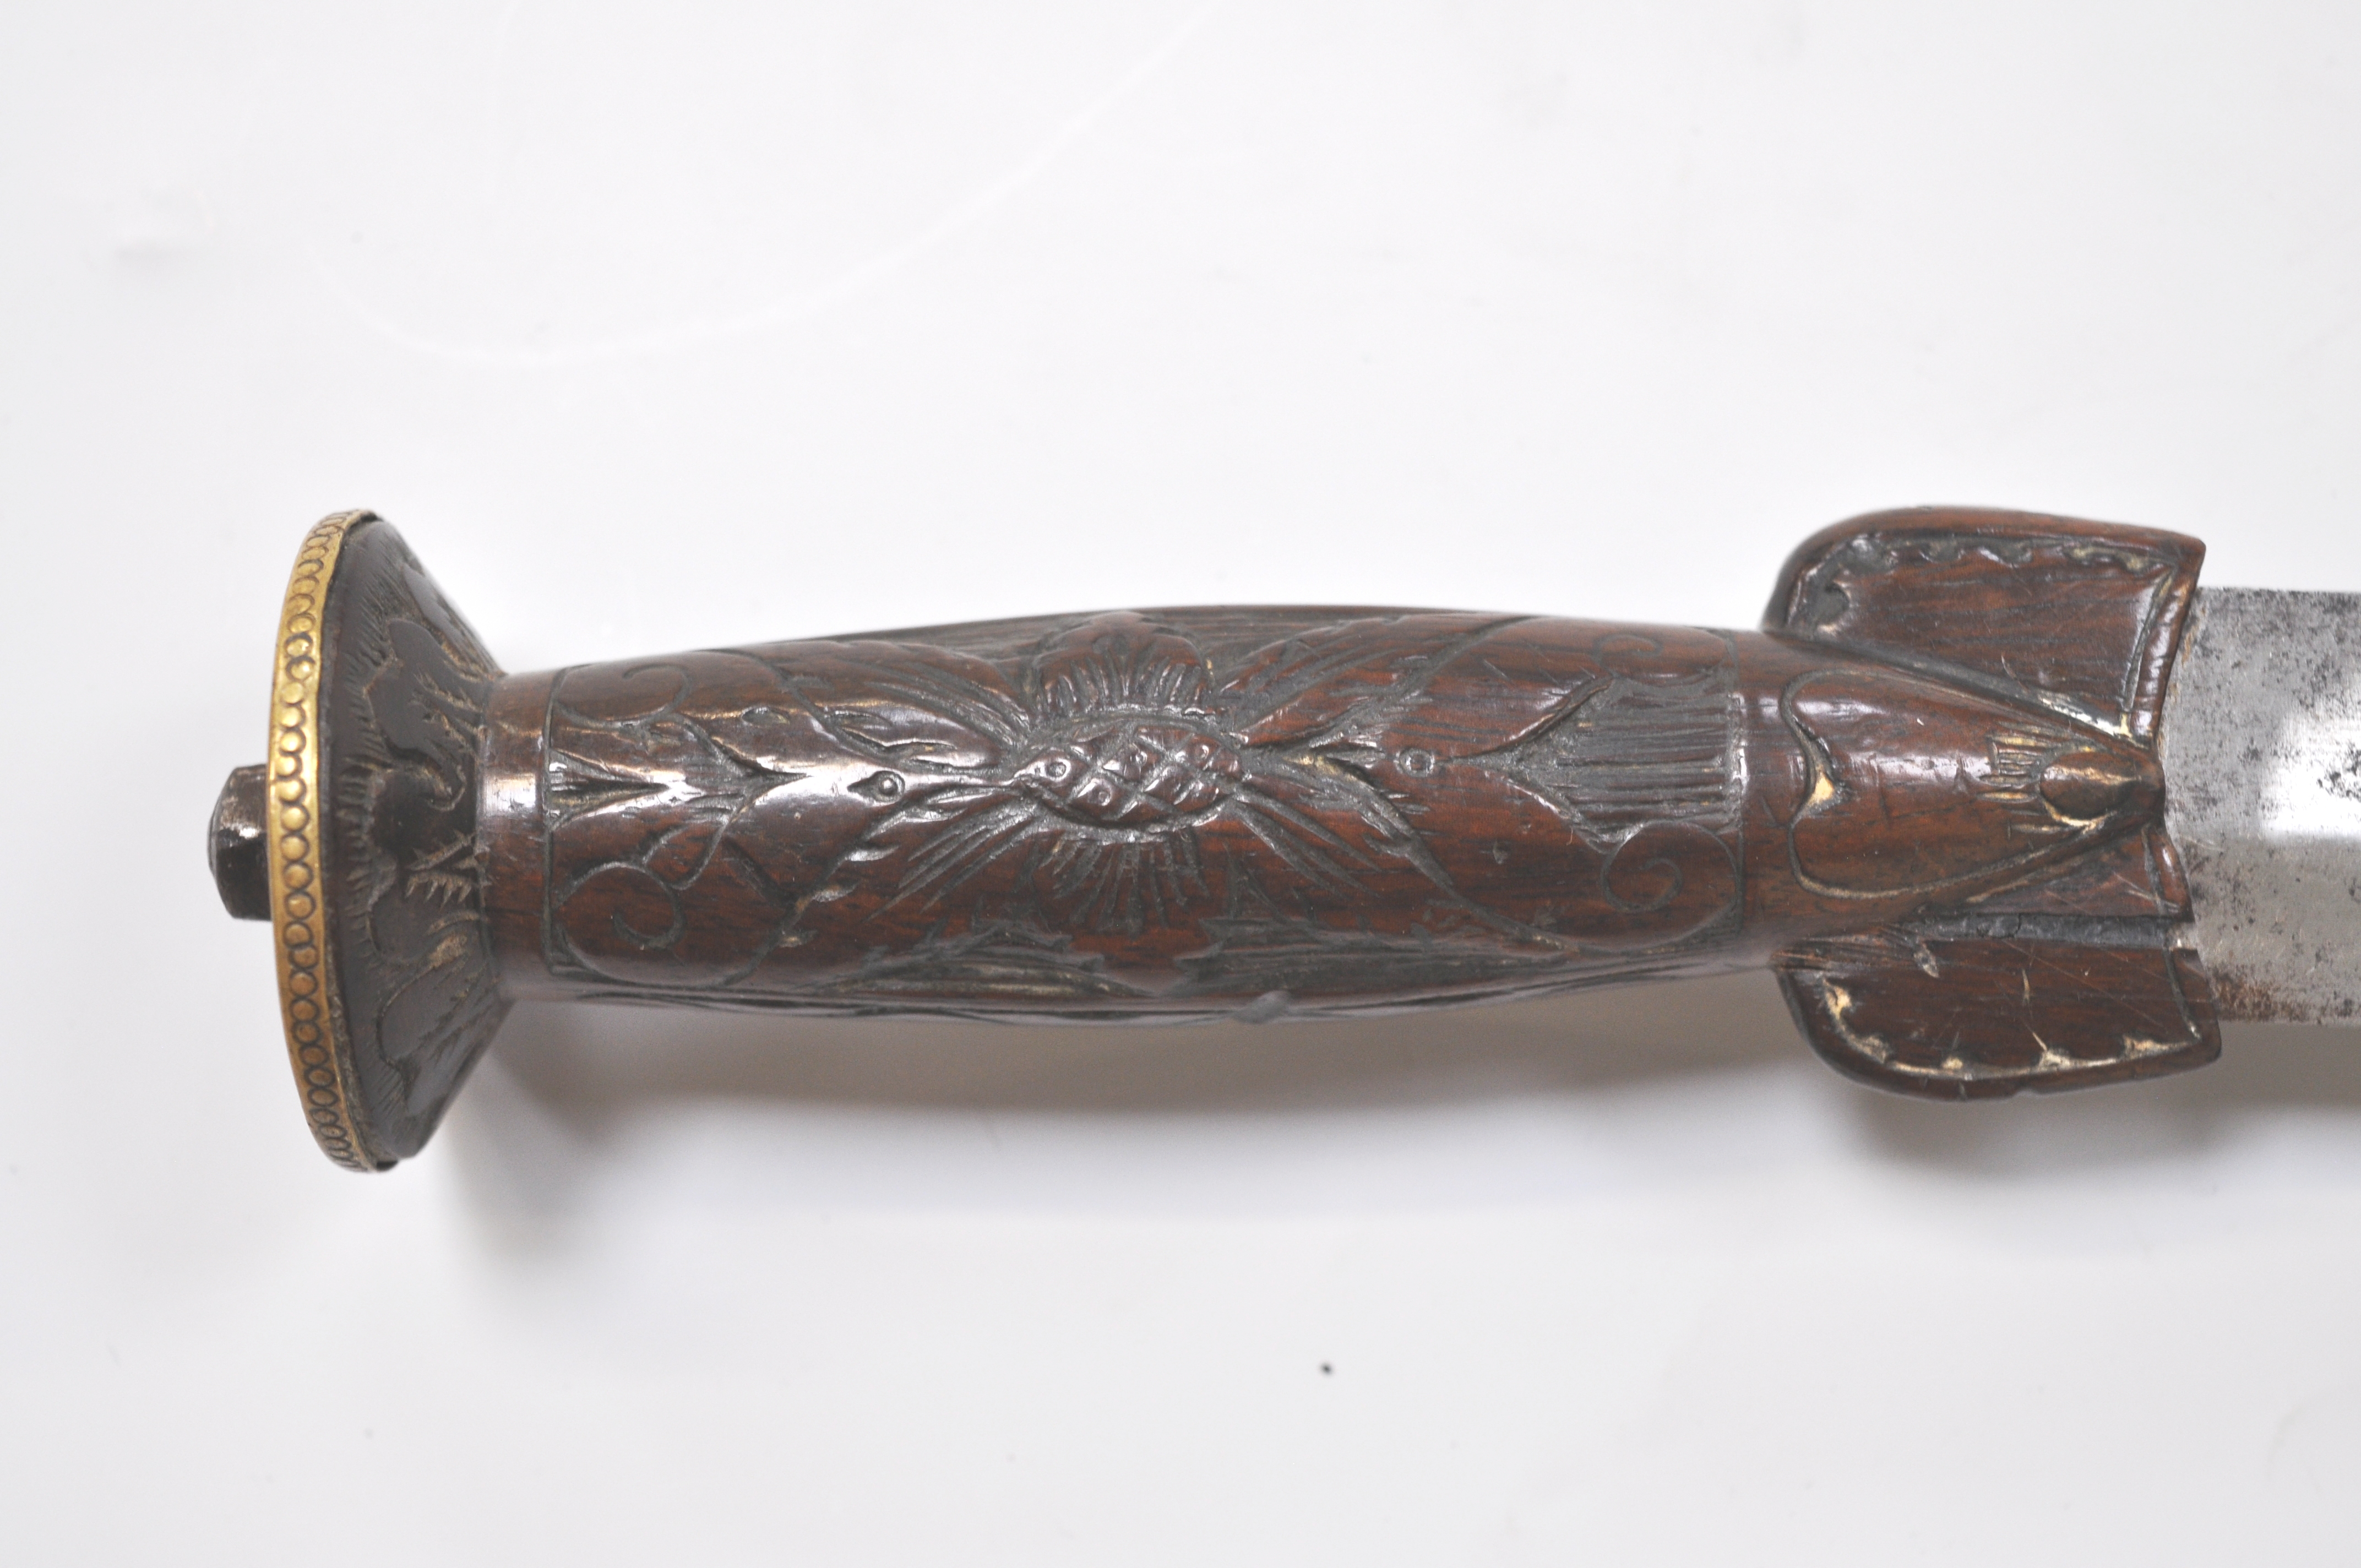 'Jacobite' Dirk, 39cms blade engraved "Prosperity to Scotia" and "No Union", - Image 2 of 9